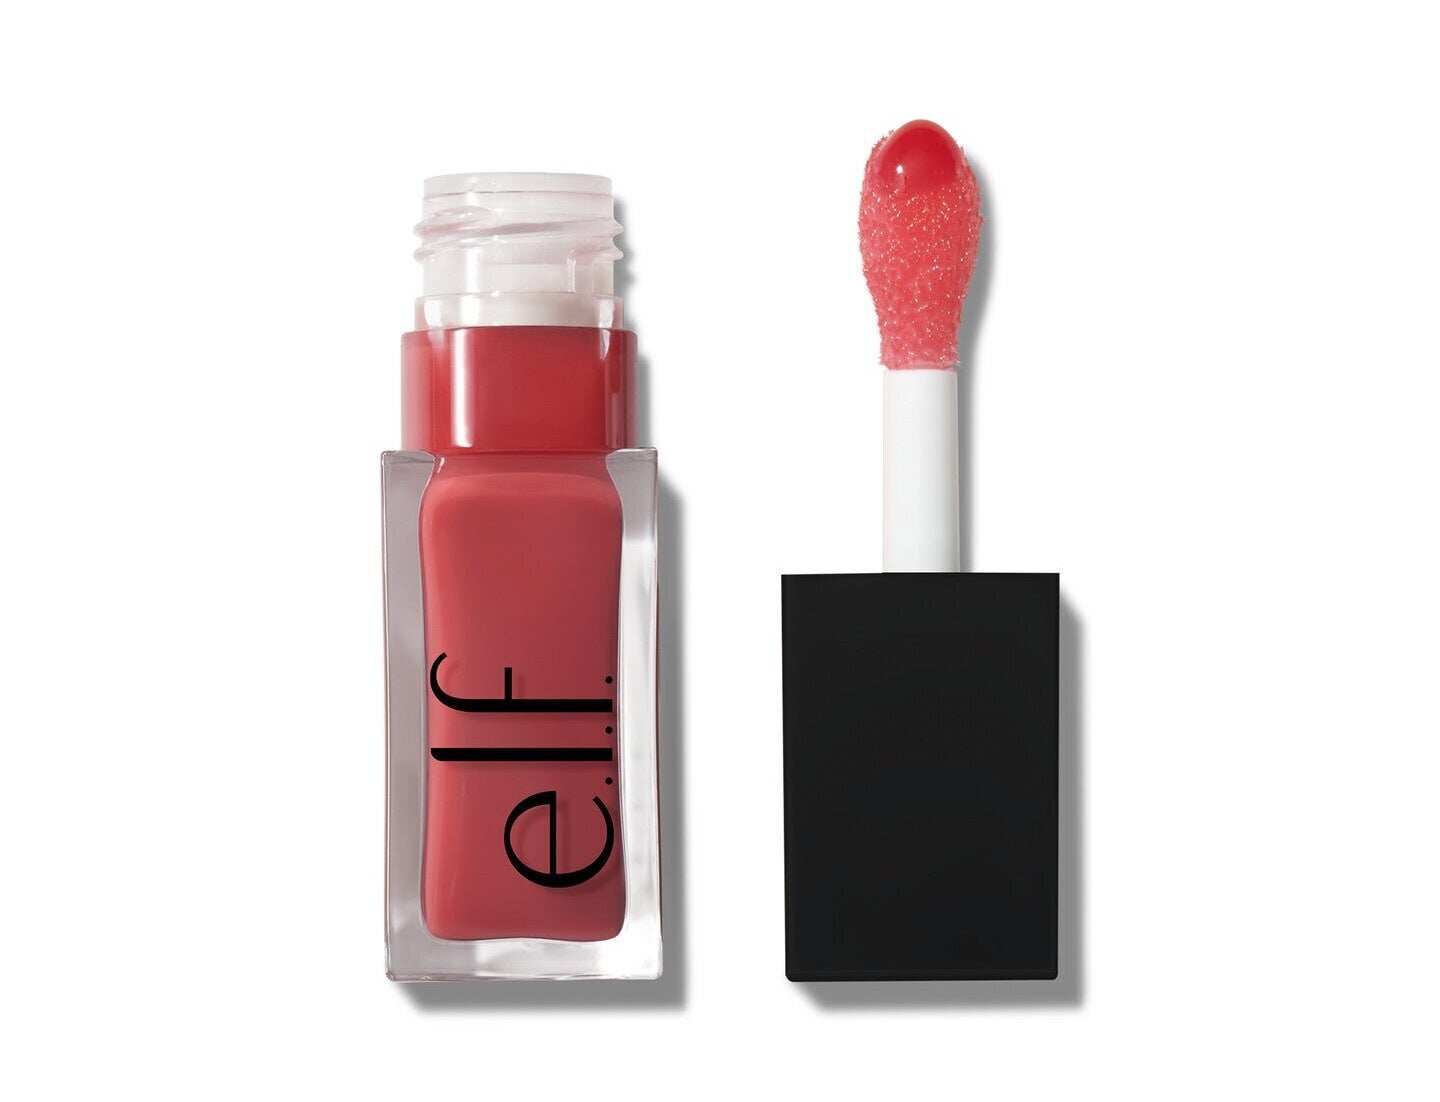 Elf cosmetics lip gloss beside its applicator on a white background